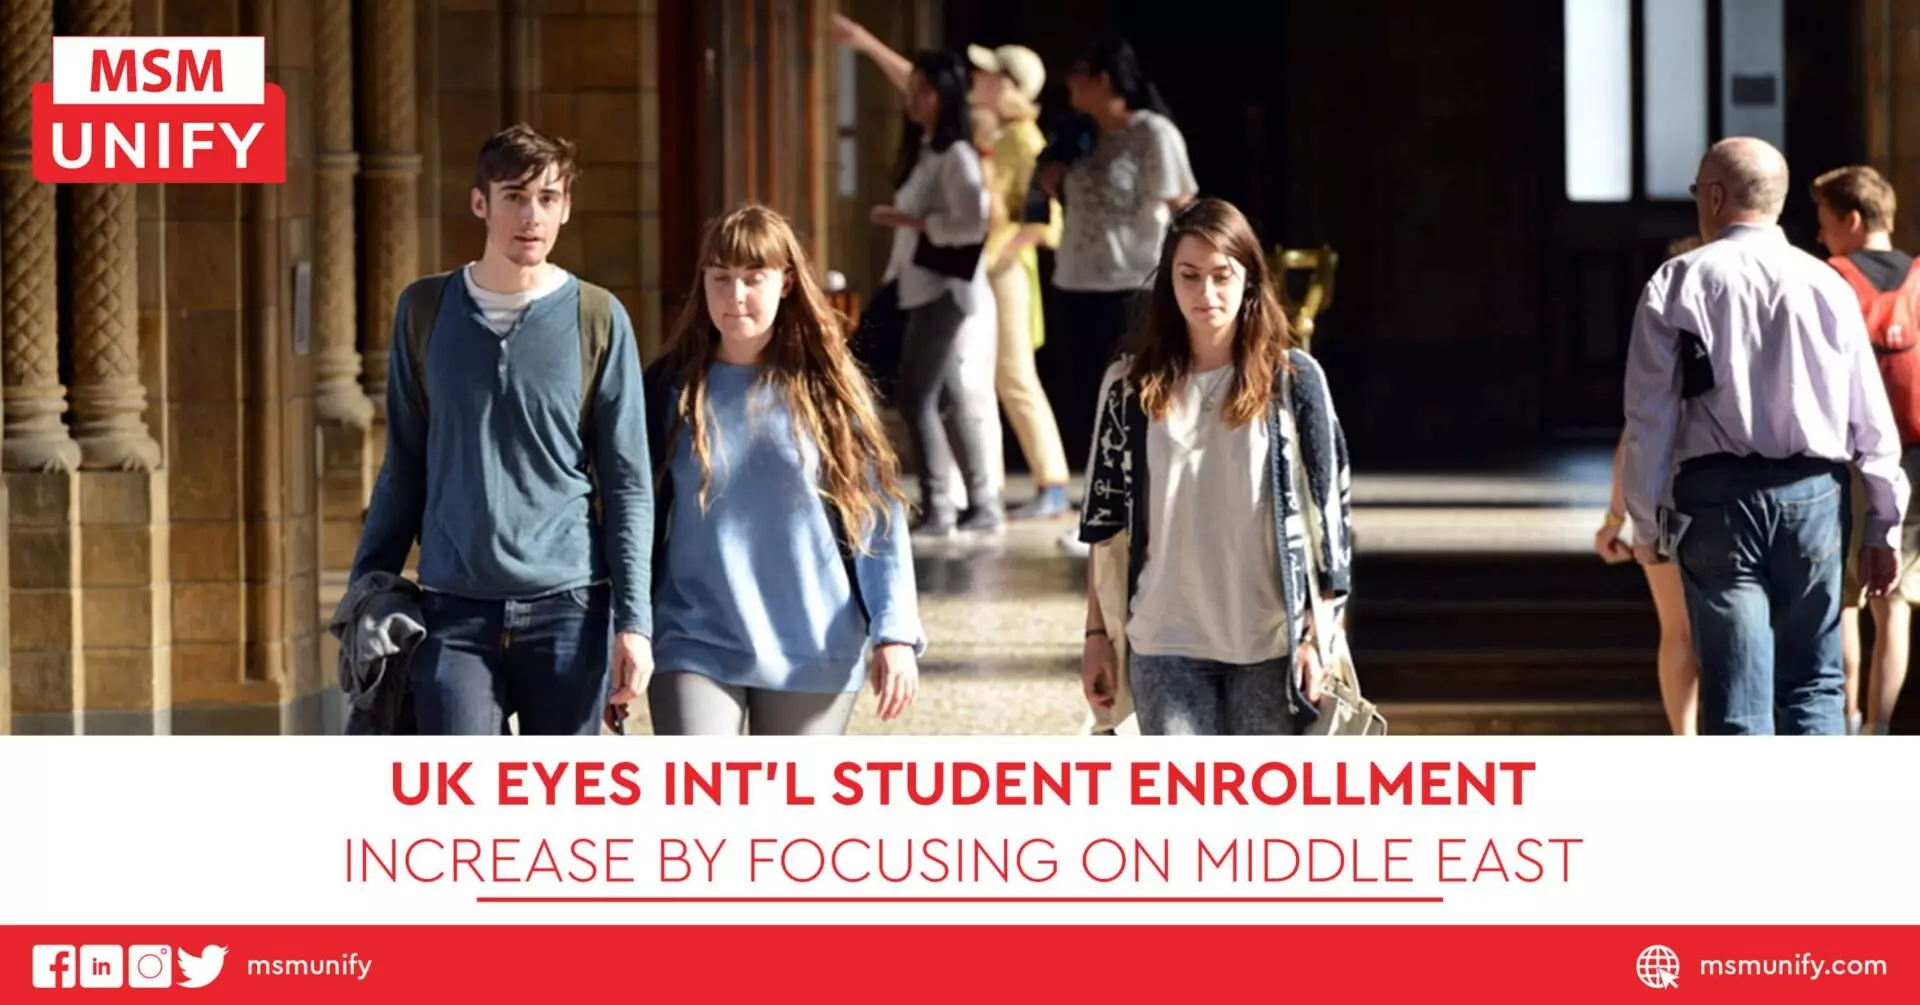 UK Eyes Intl Student Enrollment Increase by Focusing on Middle East scaled 1